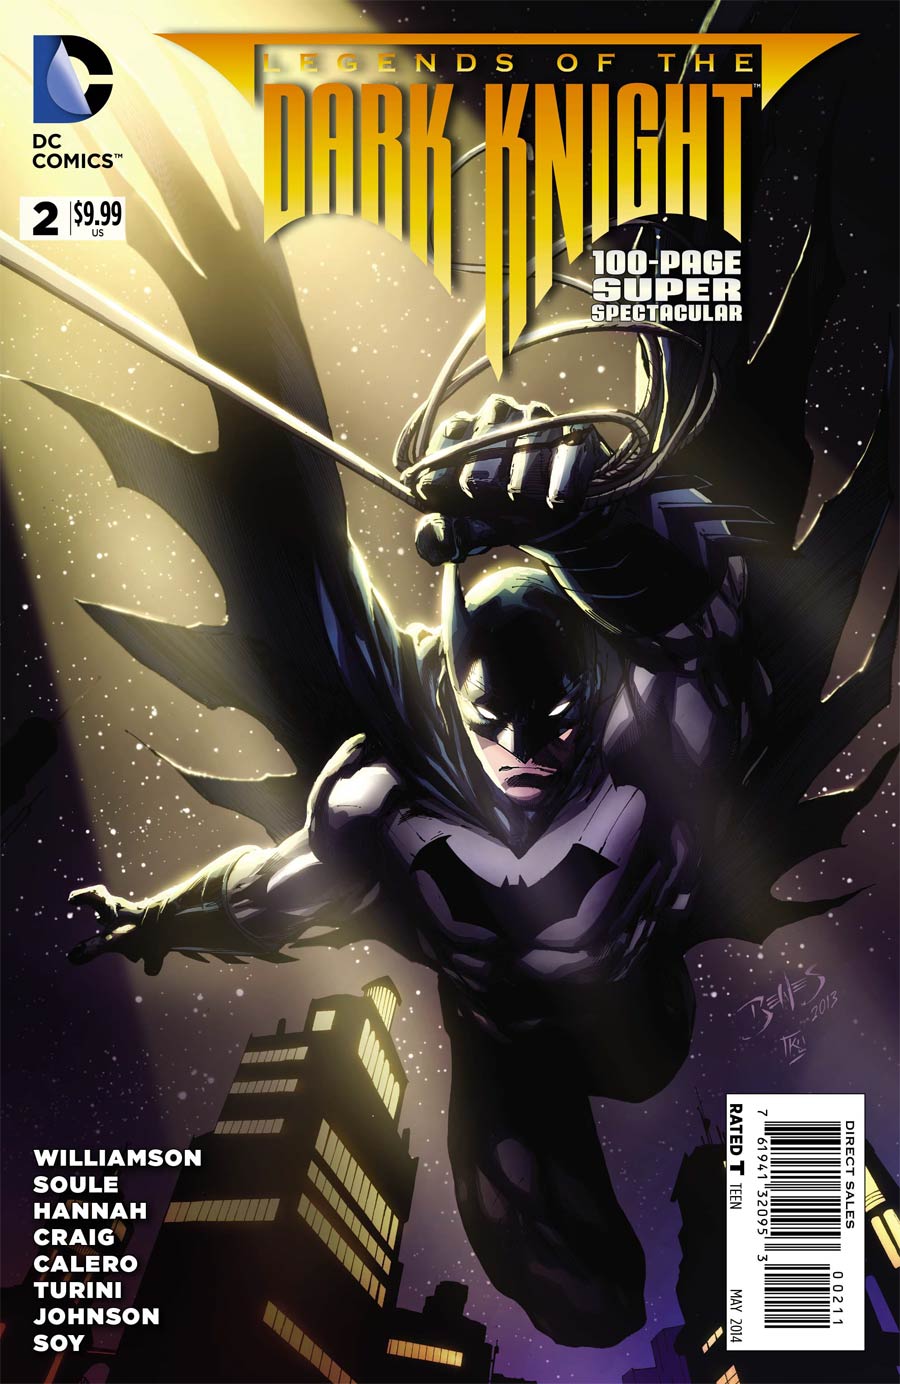 Legends Of The Dark Knight 100-Page Super Spectacular #2